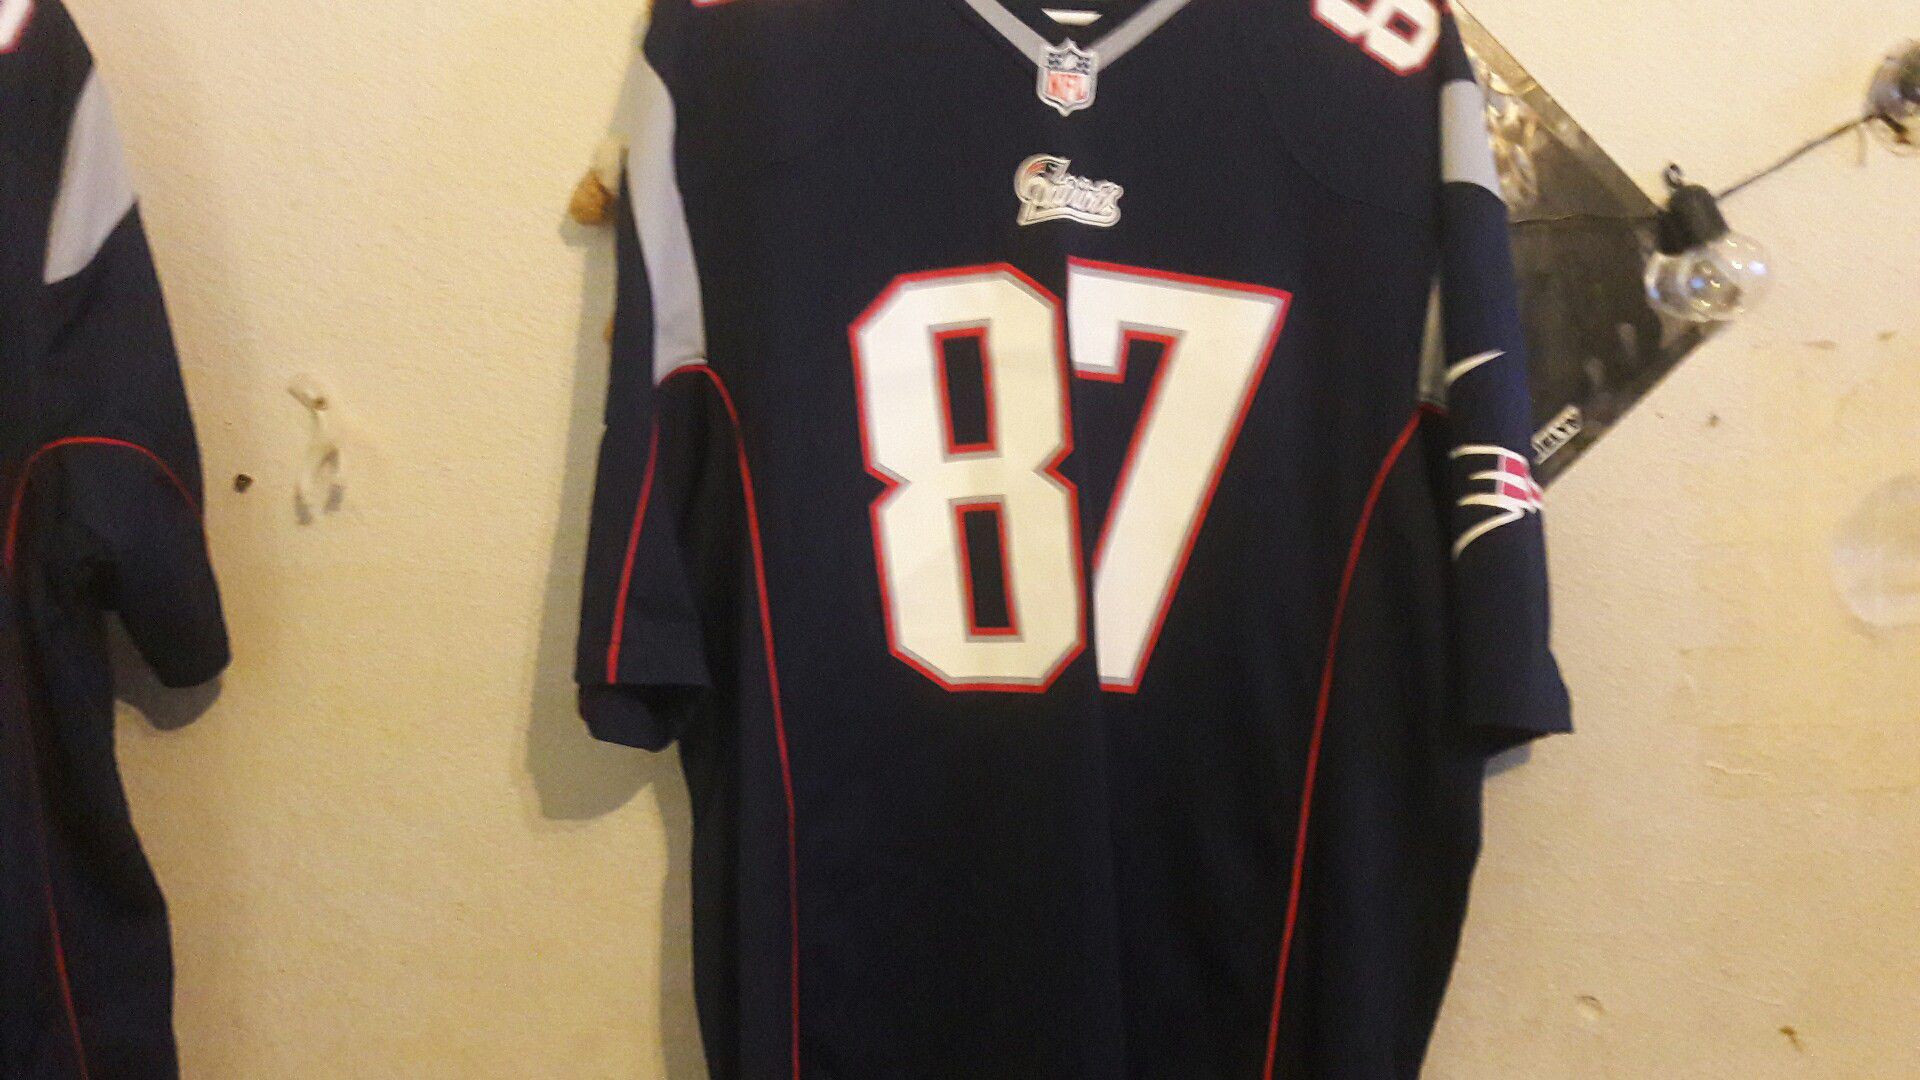 New England Patriots Jersey for sale...